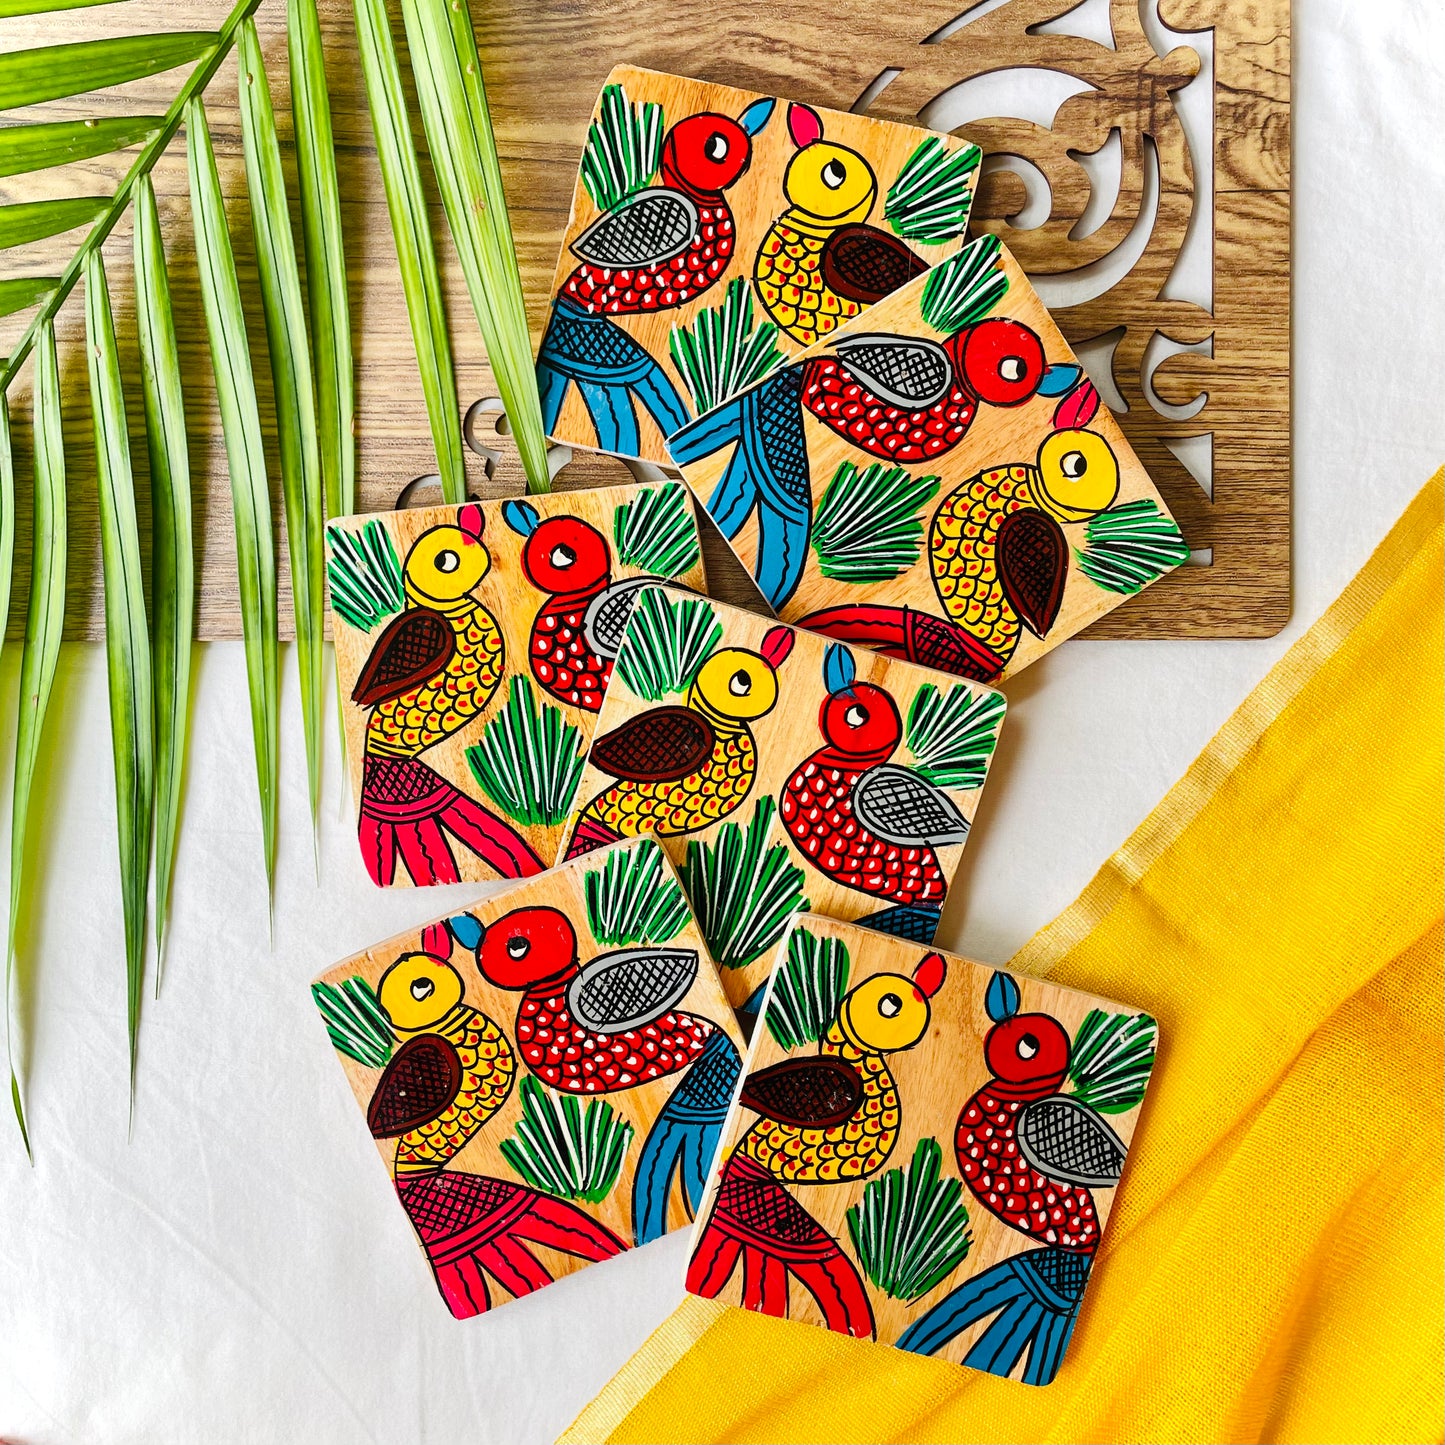 Six pure mango wood square wood coasters painted with one yellow bird with red feathers and a beak and one red with blue feathers and a beak along with some leaf in each wood coaster are placed on a wood tray with leaves in the background